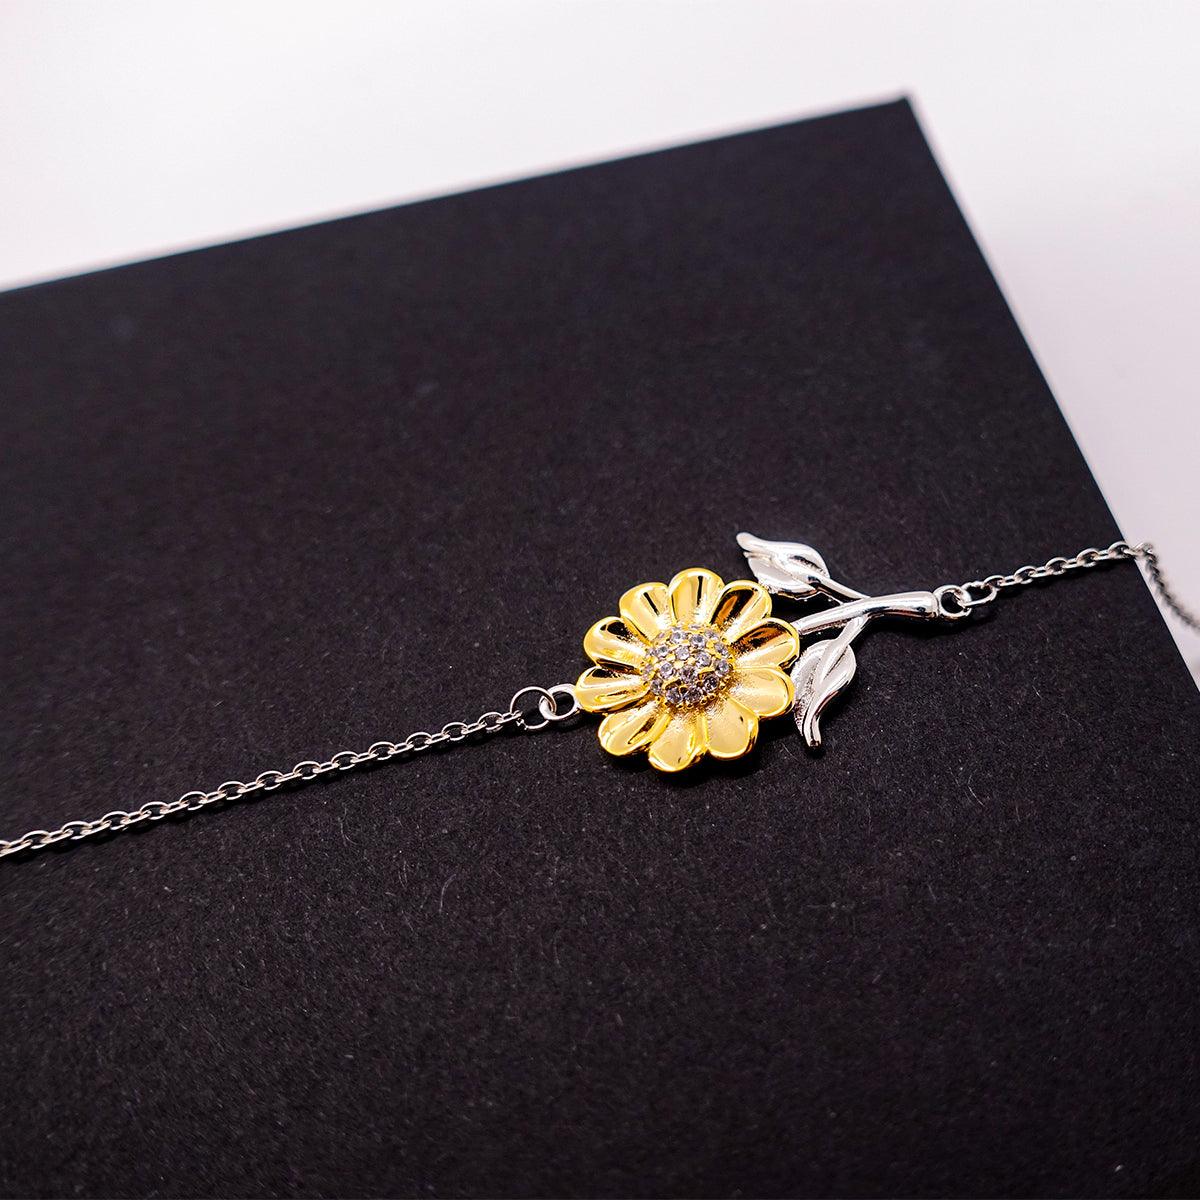 Flight Attendant Sunflower Bracelet - Thanks for being who you are - Birthday Christmas Jewelry Gifts Coworkers Colleague Boss - Mallard Moon Gift Shop